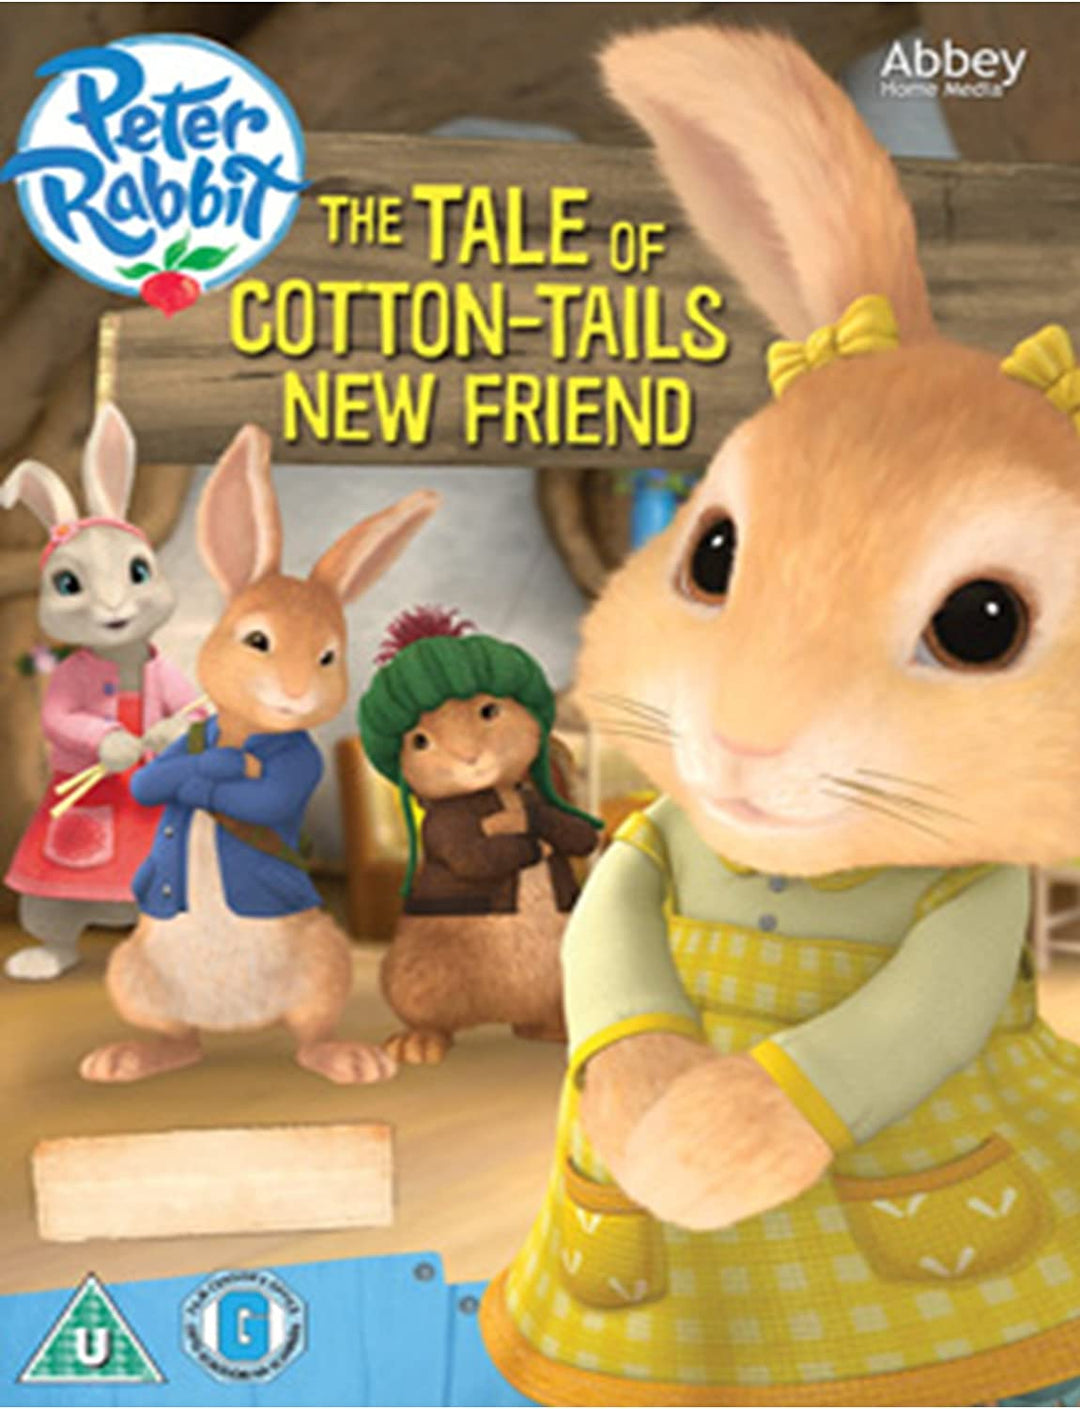 Peter Rabbit - TheTale of Cotton Tail's New Friend - Family/Comedy [DVD]